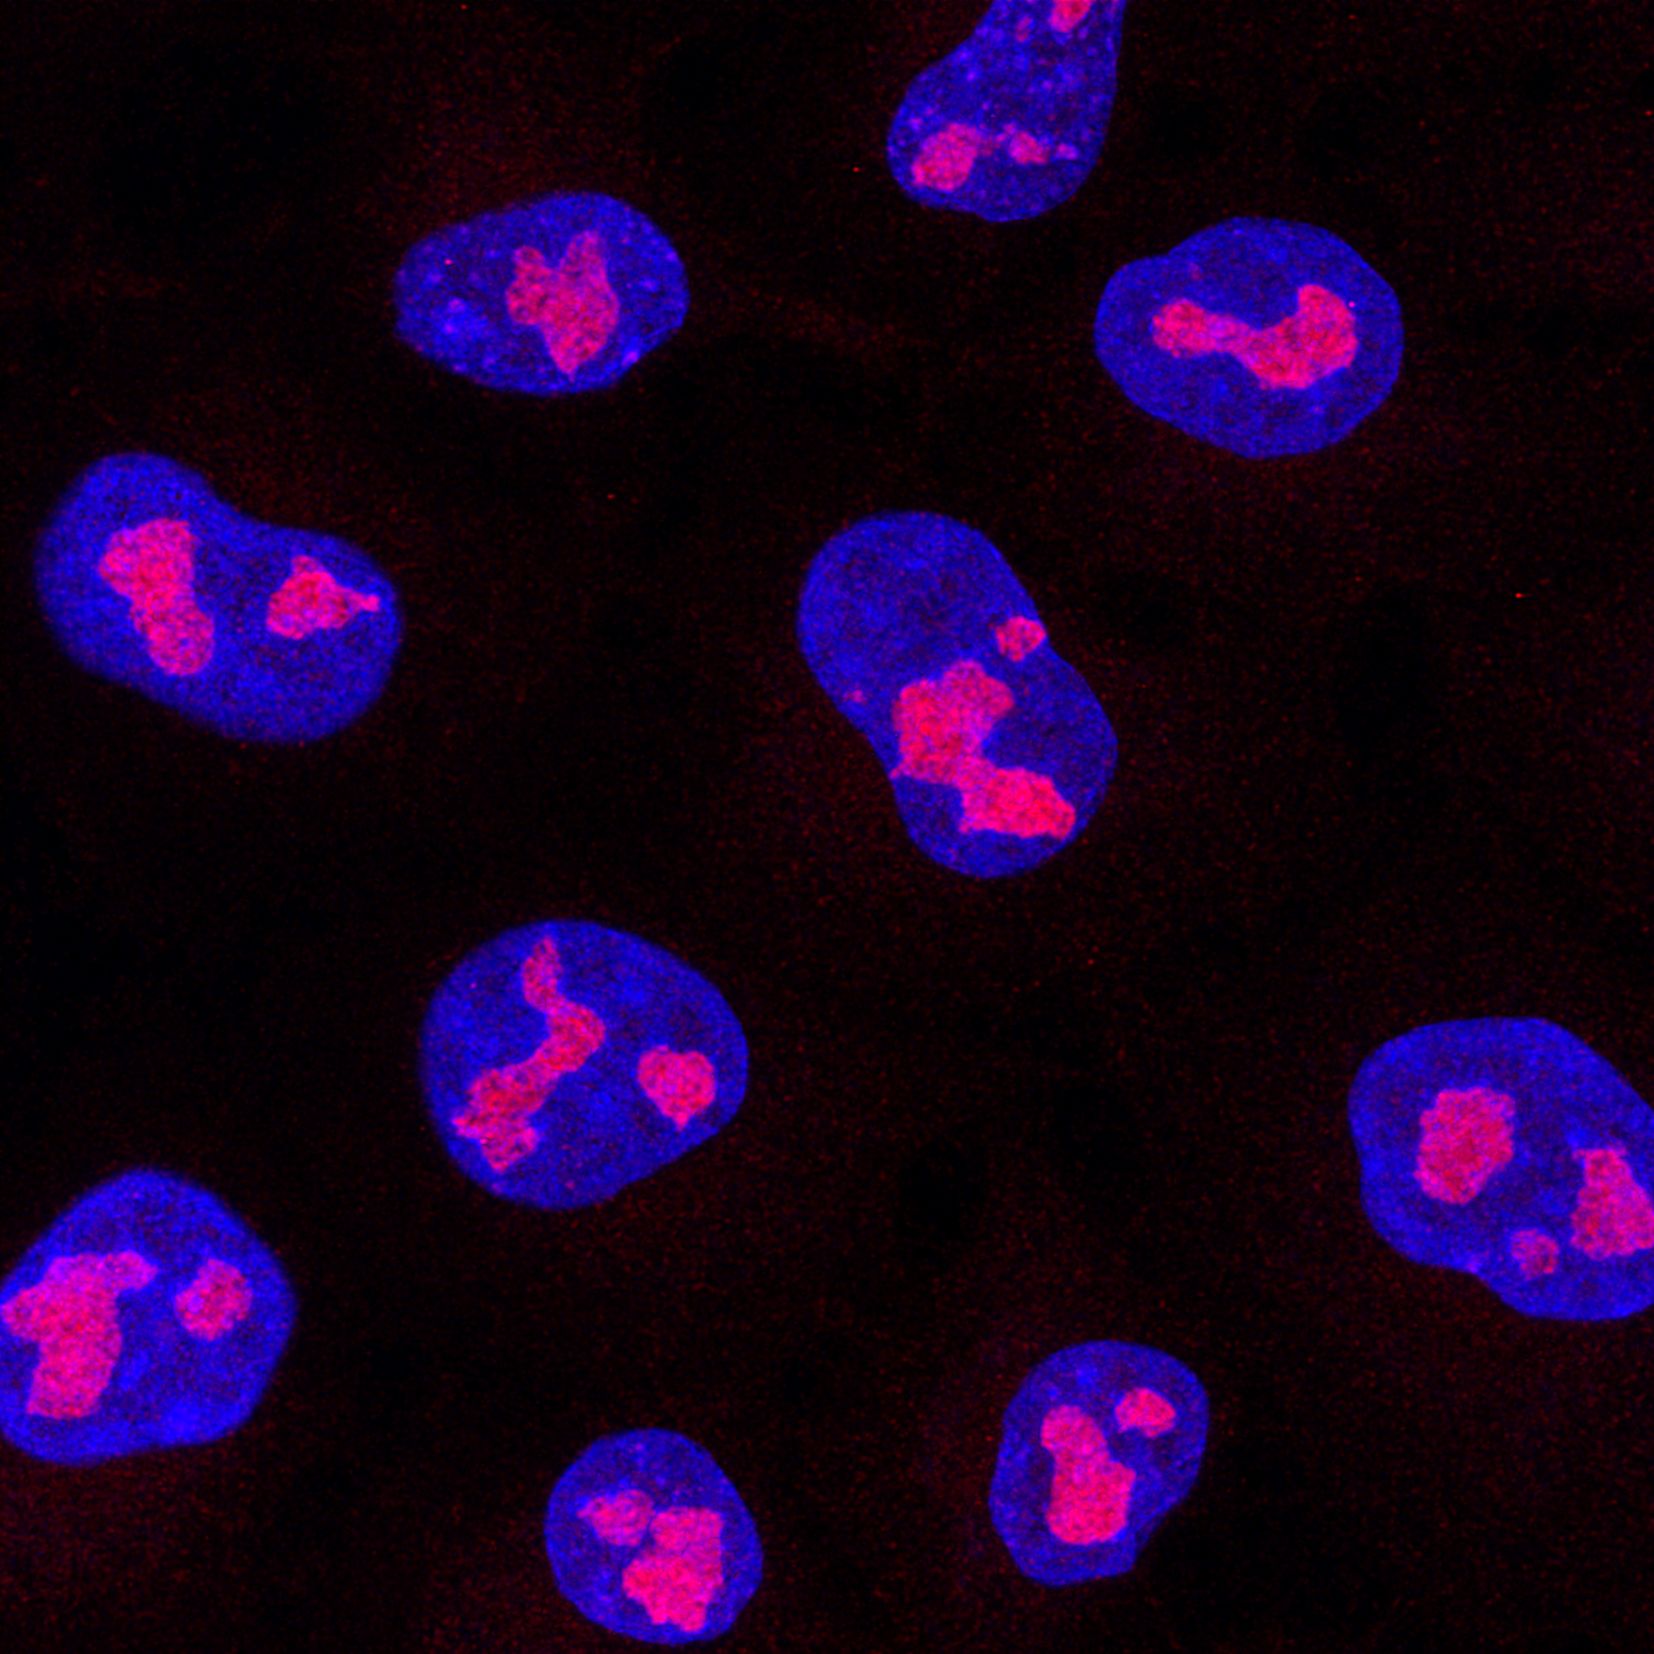 Immunofluorescence analysis of Hela cells stained with mouse IgG2a anti-GLN3 antibody (67169-1-Ig) and Nano-Secondary® alpaca anti-mouse IgG2a, recombinant VHH, CoraLite® Plus 555 (magenta). Nuclei were stained with DAPI (blue). Images were recorded at the Core Facility Bioimaging at the Biomedical Center, LMU Munich.